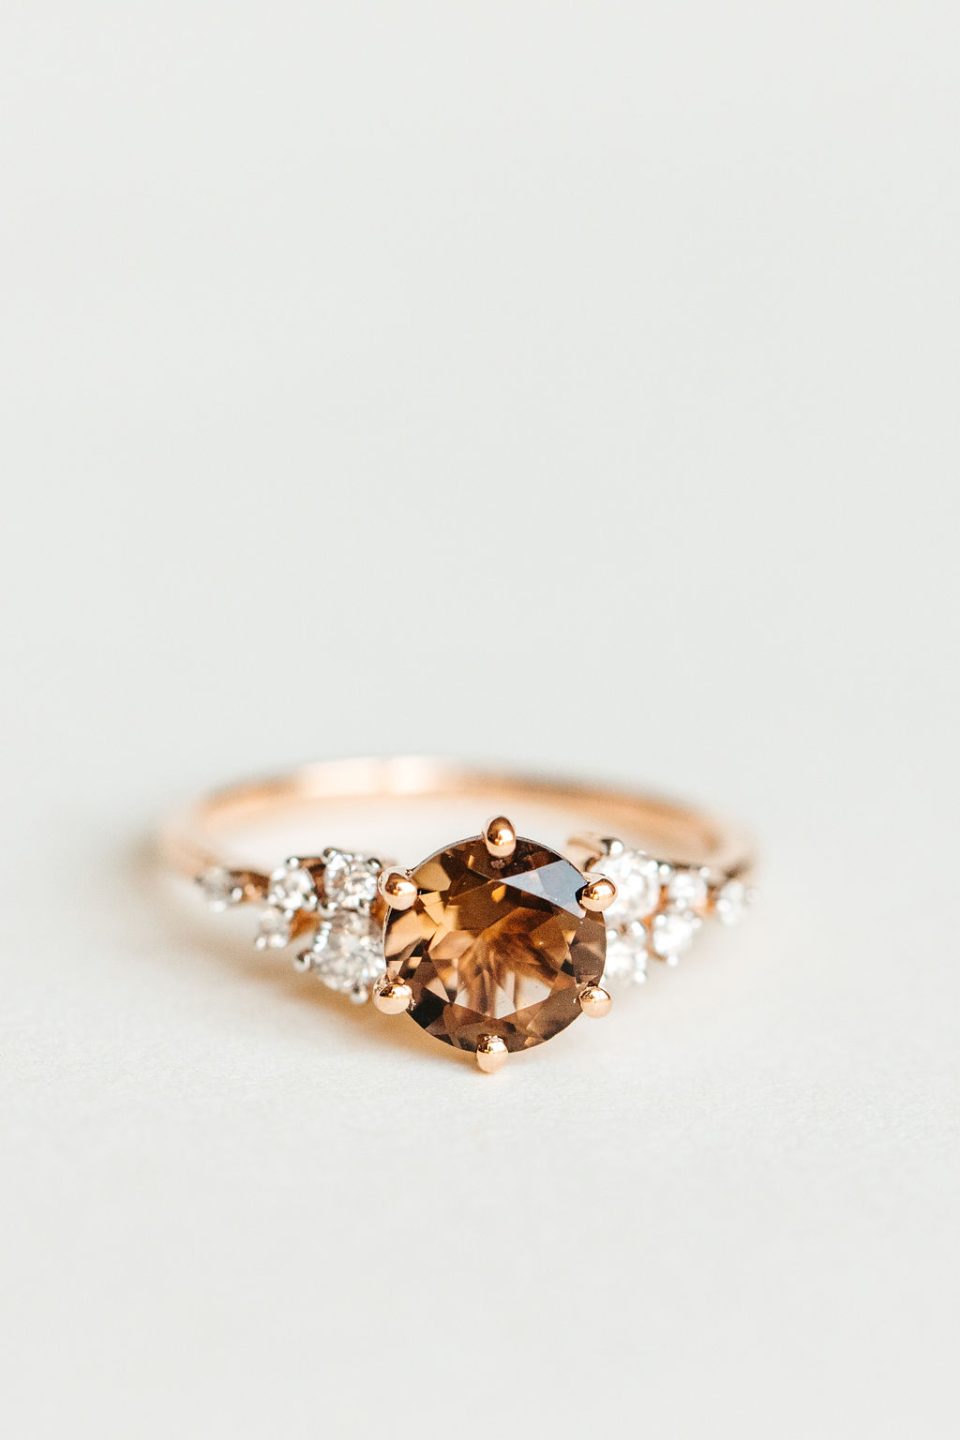 Bespoke Ring with 7MM Smoky Quartz and .20 Carat TW Diamonds in 14kt Rose Gold